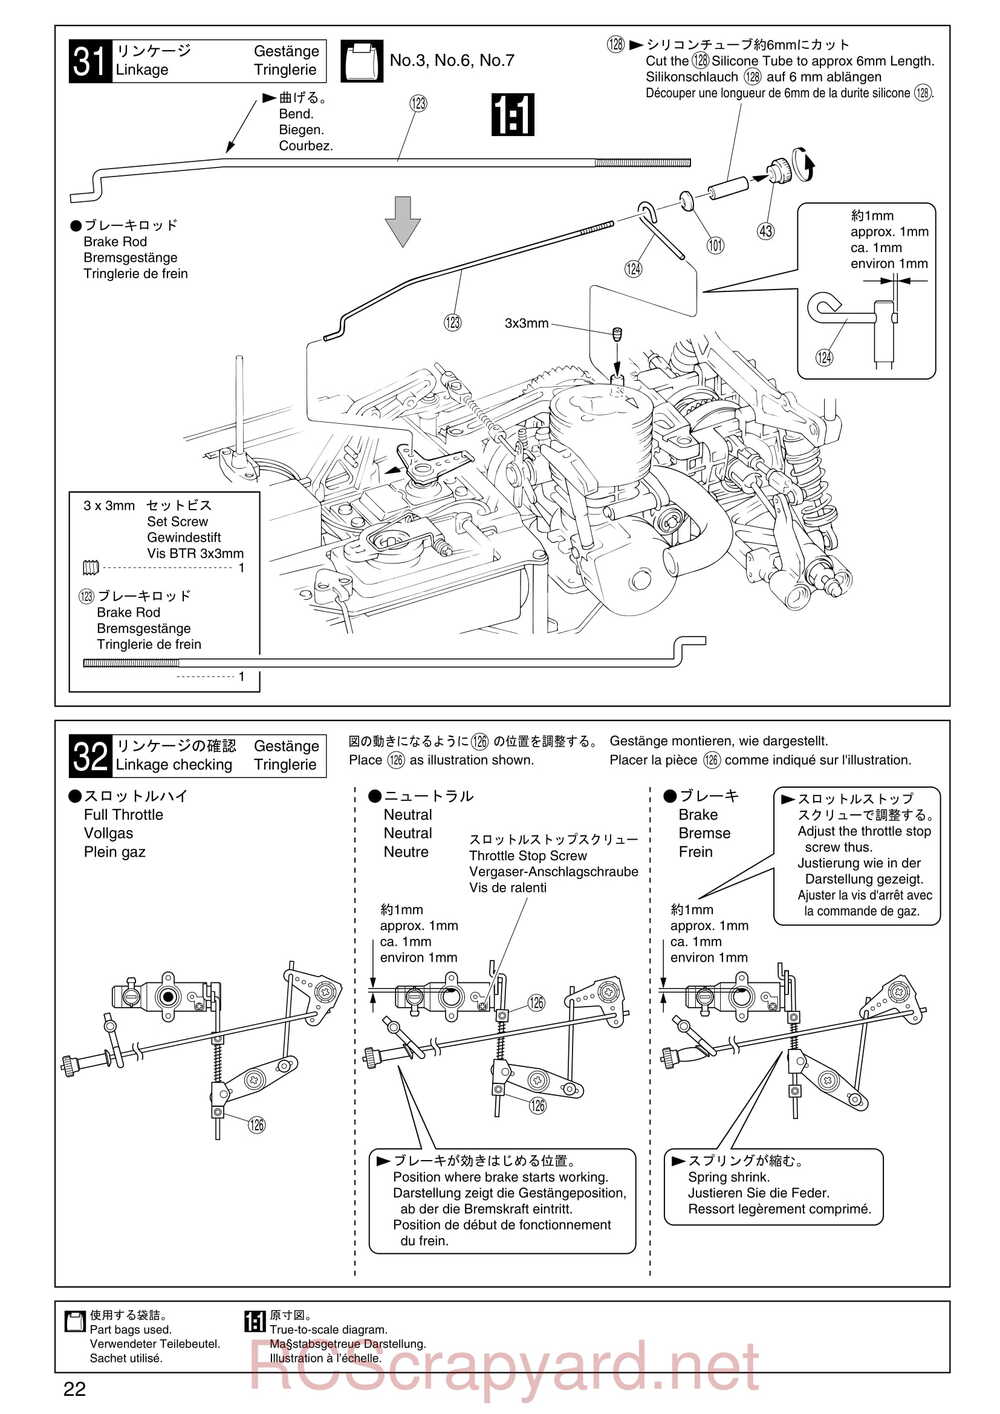 Kyosho - 31241 - V-One-S - Manual - Page 22